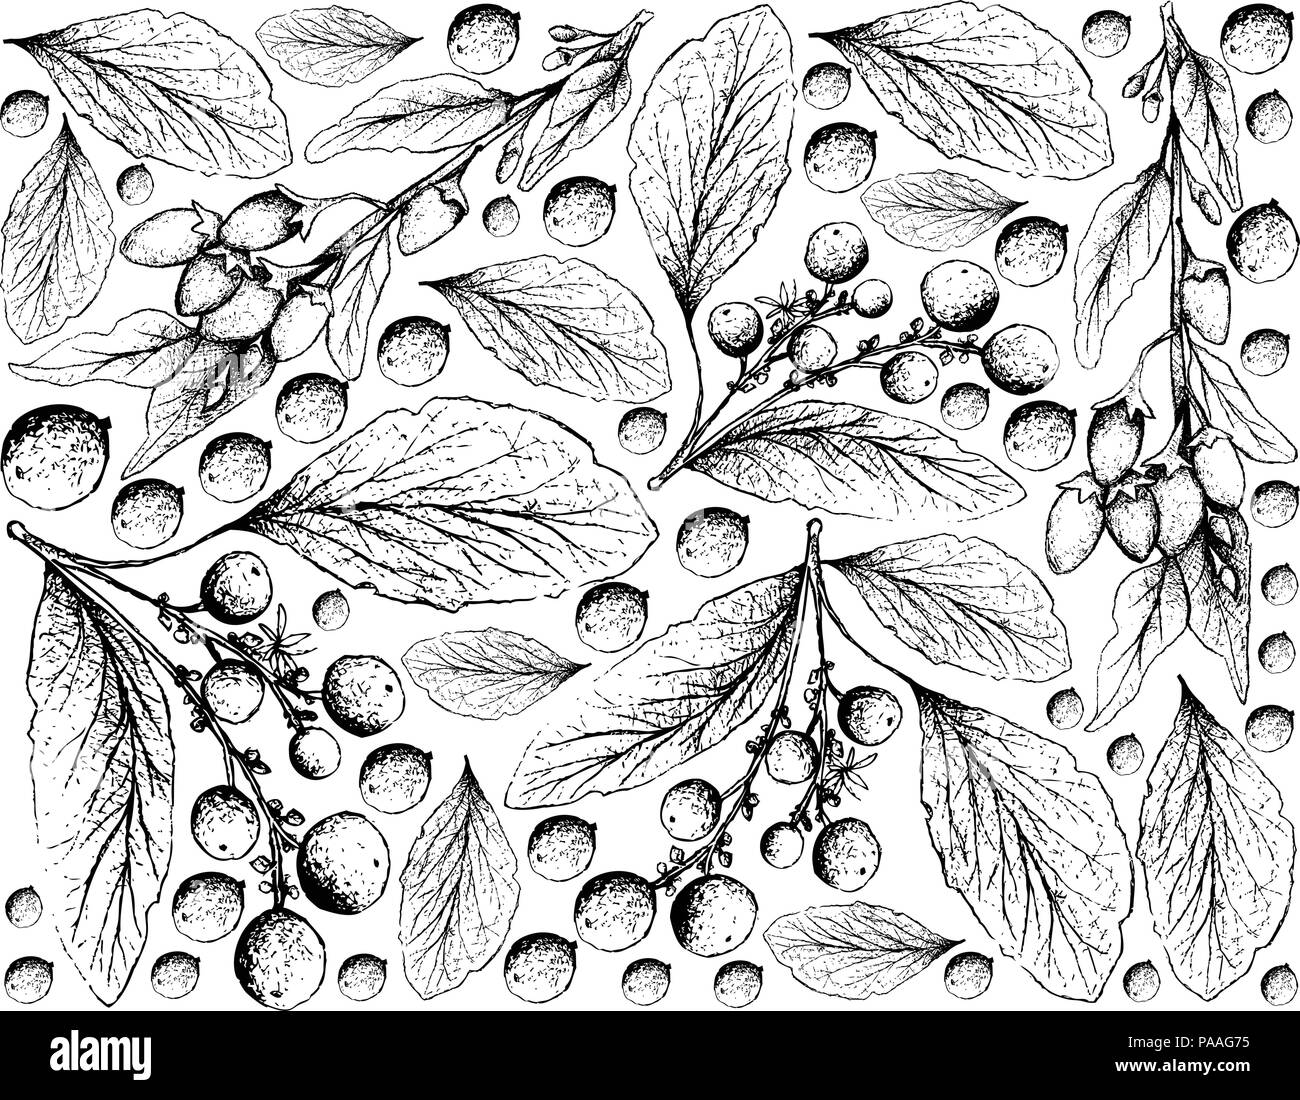 Berry Fruit, Illustration Wallpaper Background of Hand Drawn Sketch of Goji Berry or Lycium Barbarum and Orangeberry, Gin Berry or Glycosmis Pentaphyl Stock Vector